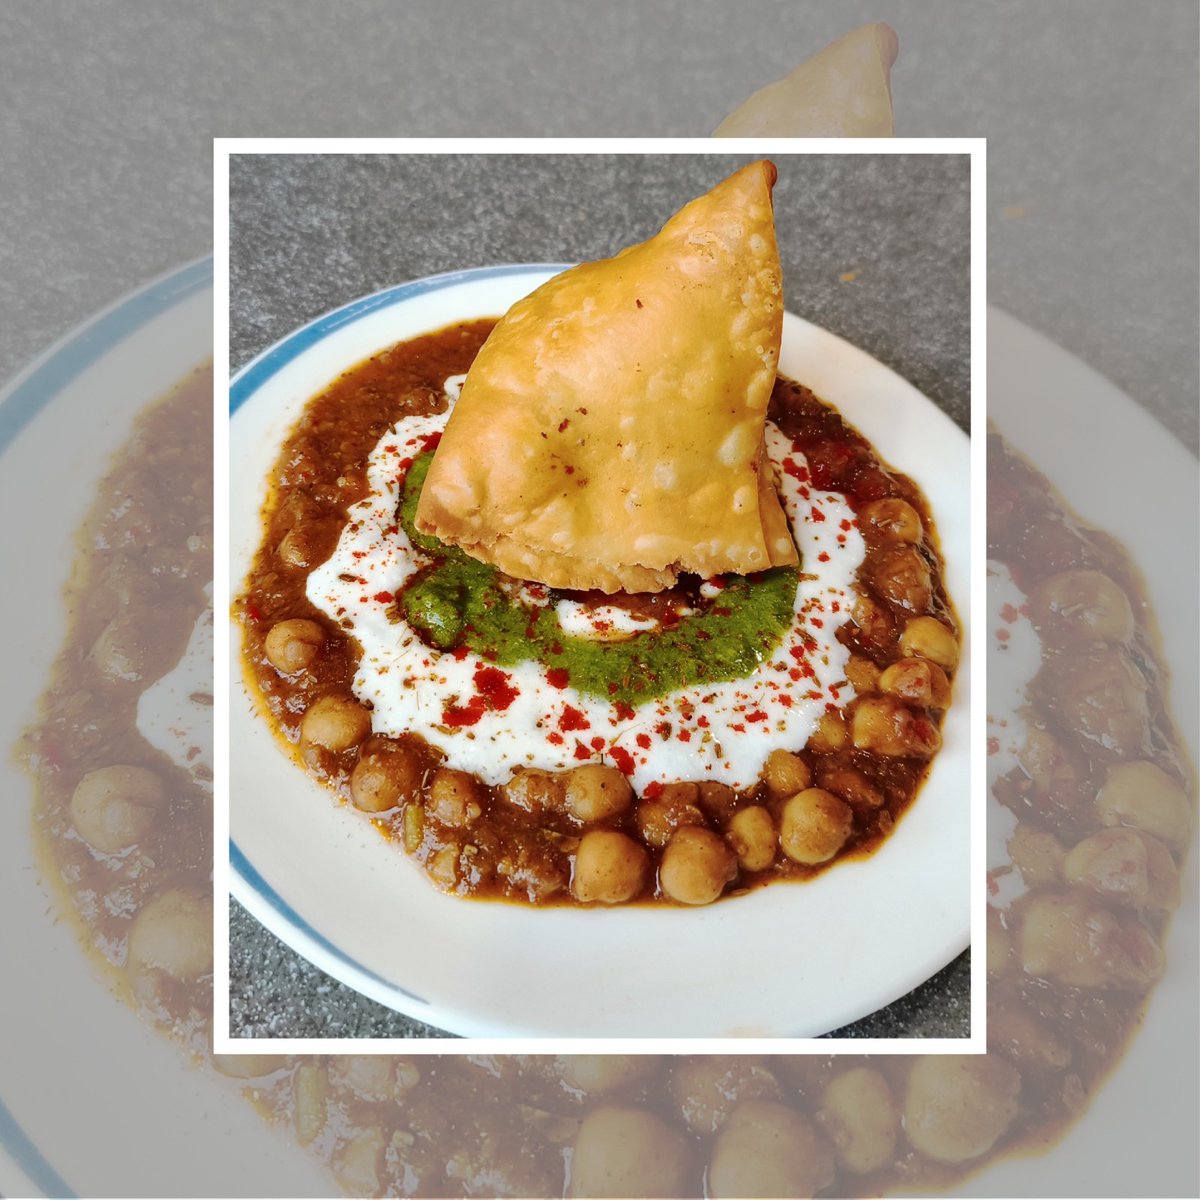 Feel the flavour of Delhi's Street Style food with our SAMOSA CHHOLAY CHAAT!

Get your hands on this mouth-watering chaat & taste the tangy, and crunchy flavor.

Call:
📍Oshiwara- +91 77150 33300
📍Malad- +91 80979 73222

#chholay #samosachaat #chaat #delhistylechaat